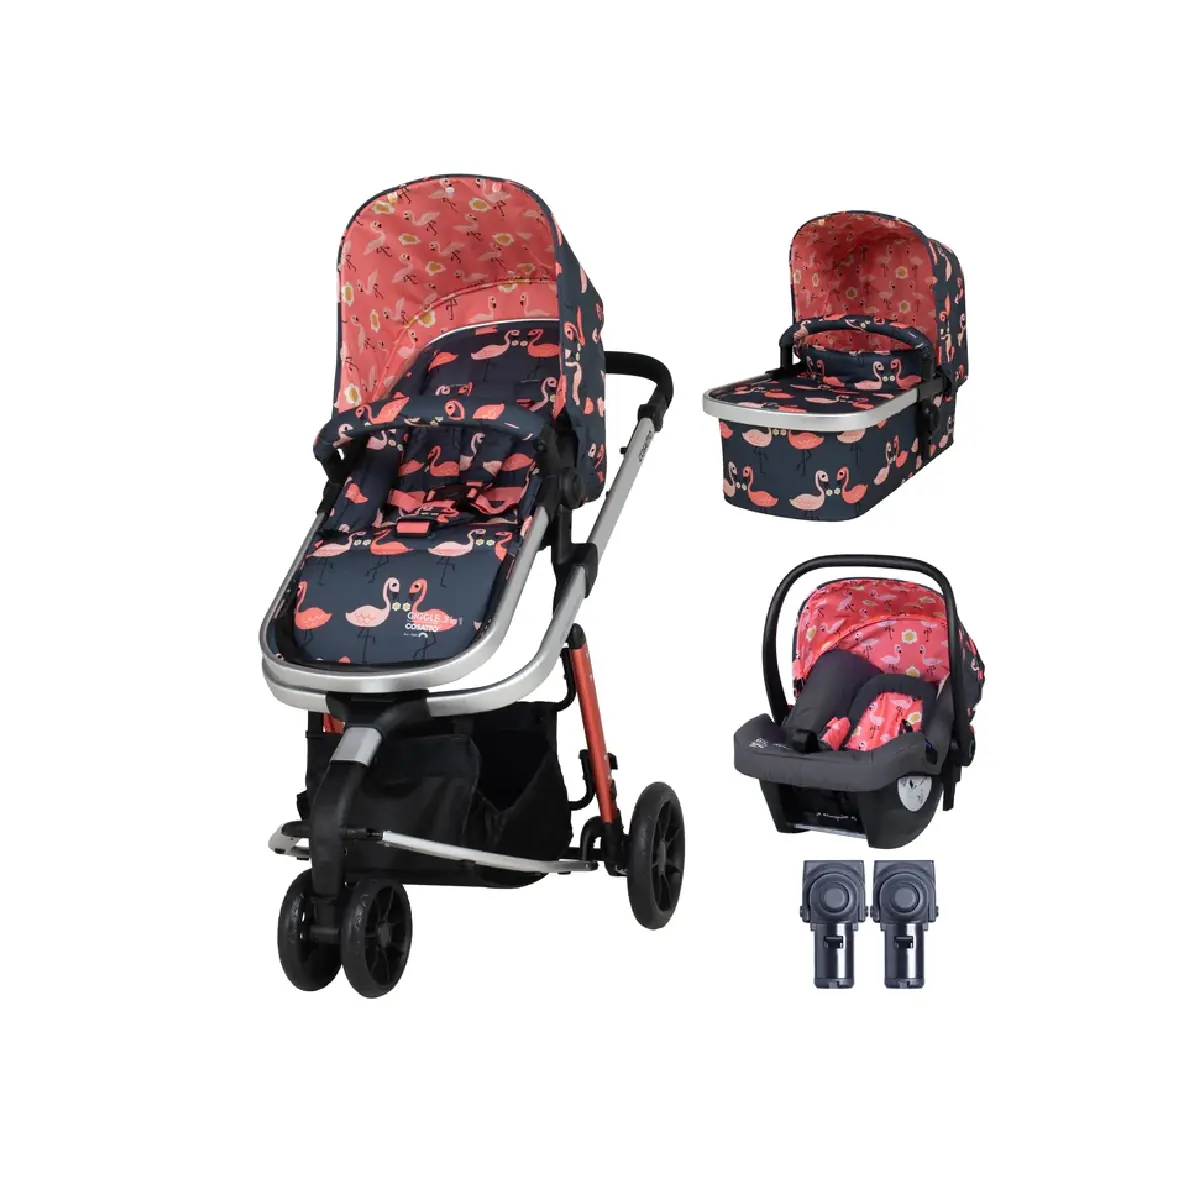 Cosatto Giggle 3in1 Travel System Bundle